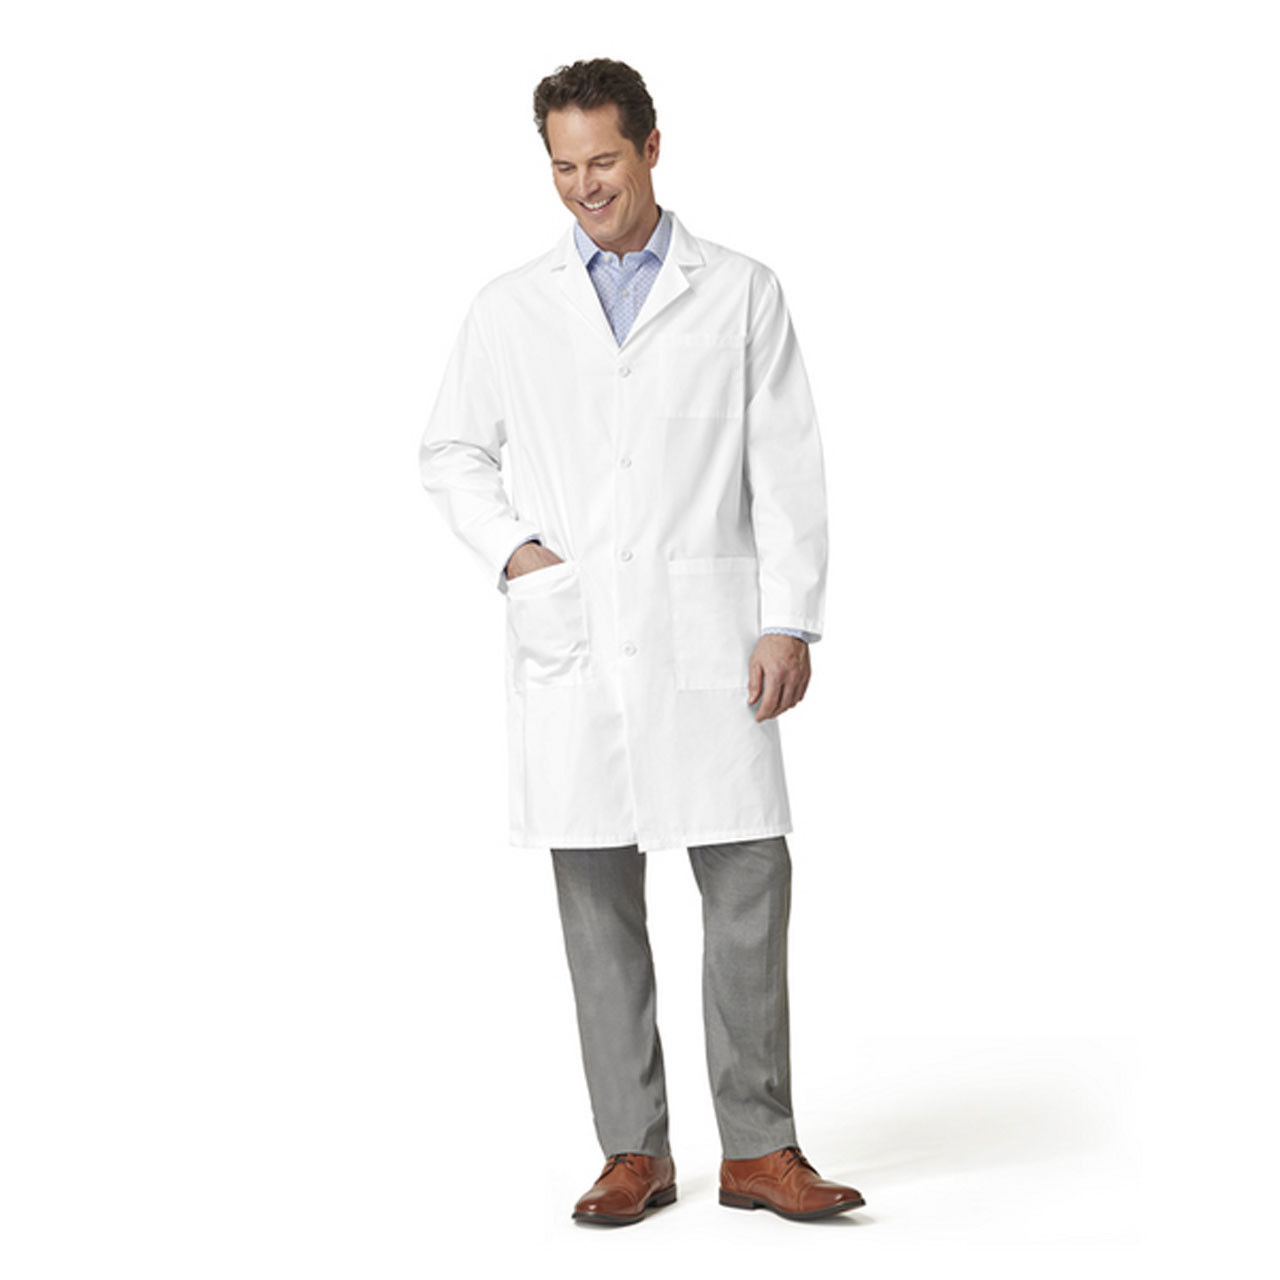 Do bulk lab coats from Fashion Seal come in various sizes?